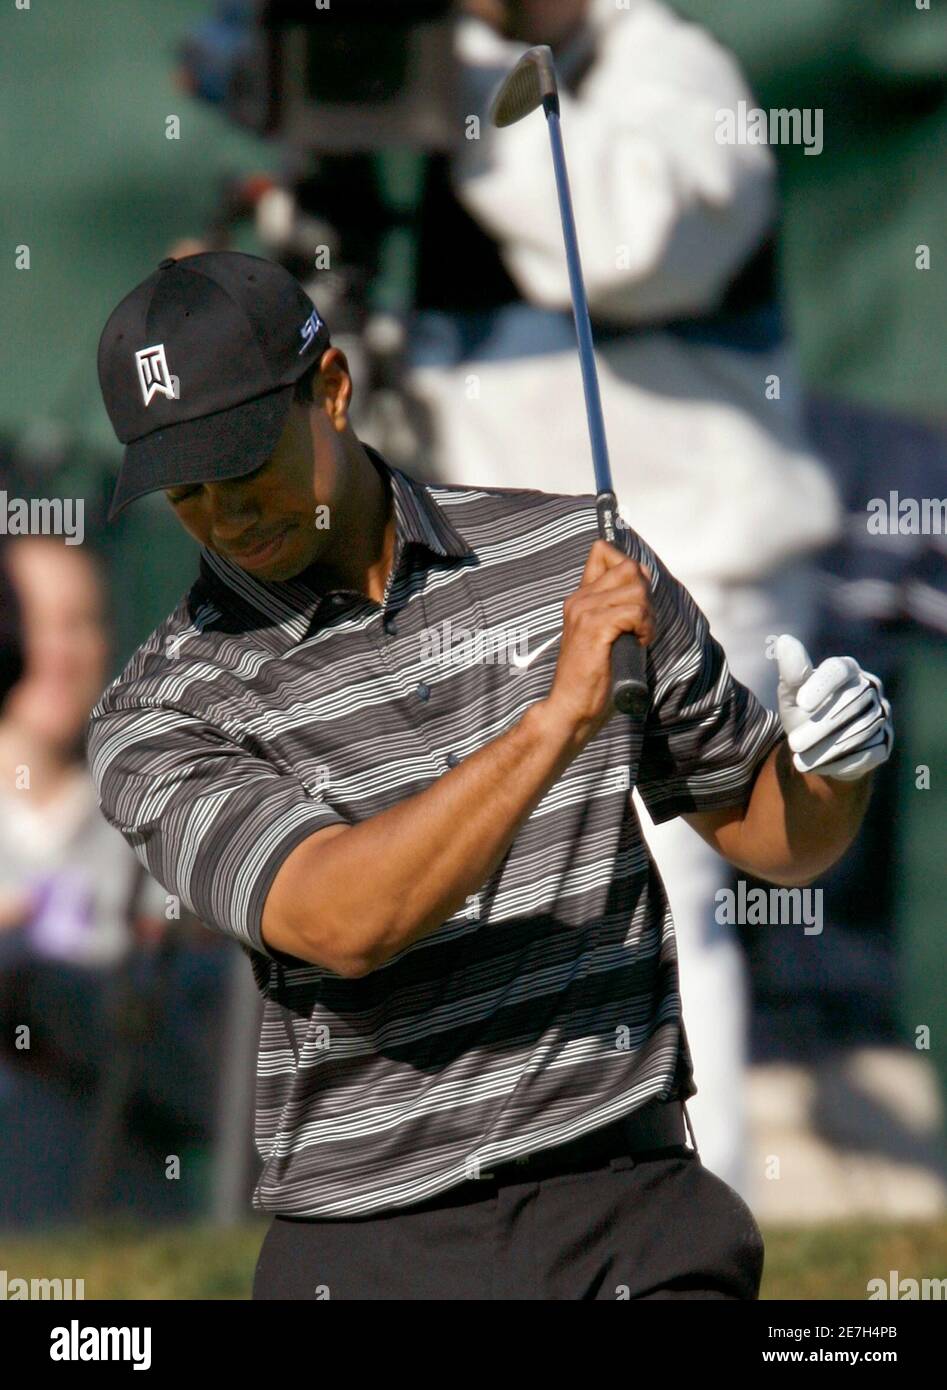 Tiger Woods of the U.S. reacts to a bunker shot on the 18th green during second round play on the south course at the Buick Invitational golf tournament at Torrey Pines in La Jolla, California January 26, 2007.  REUTERS/Mike Blake (UNITED STATES) Stock Photo